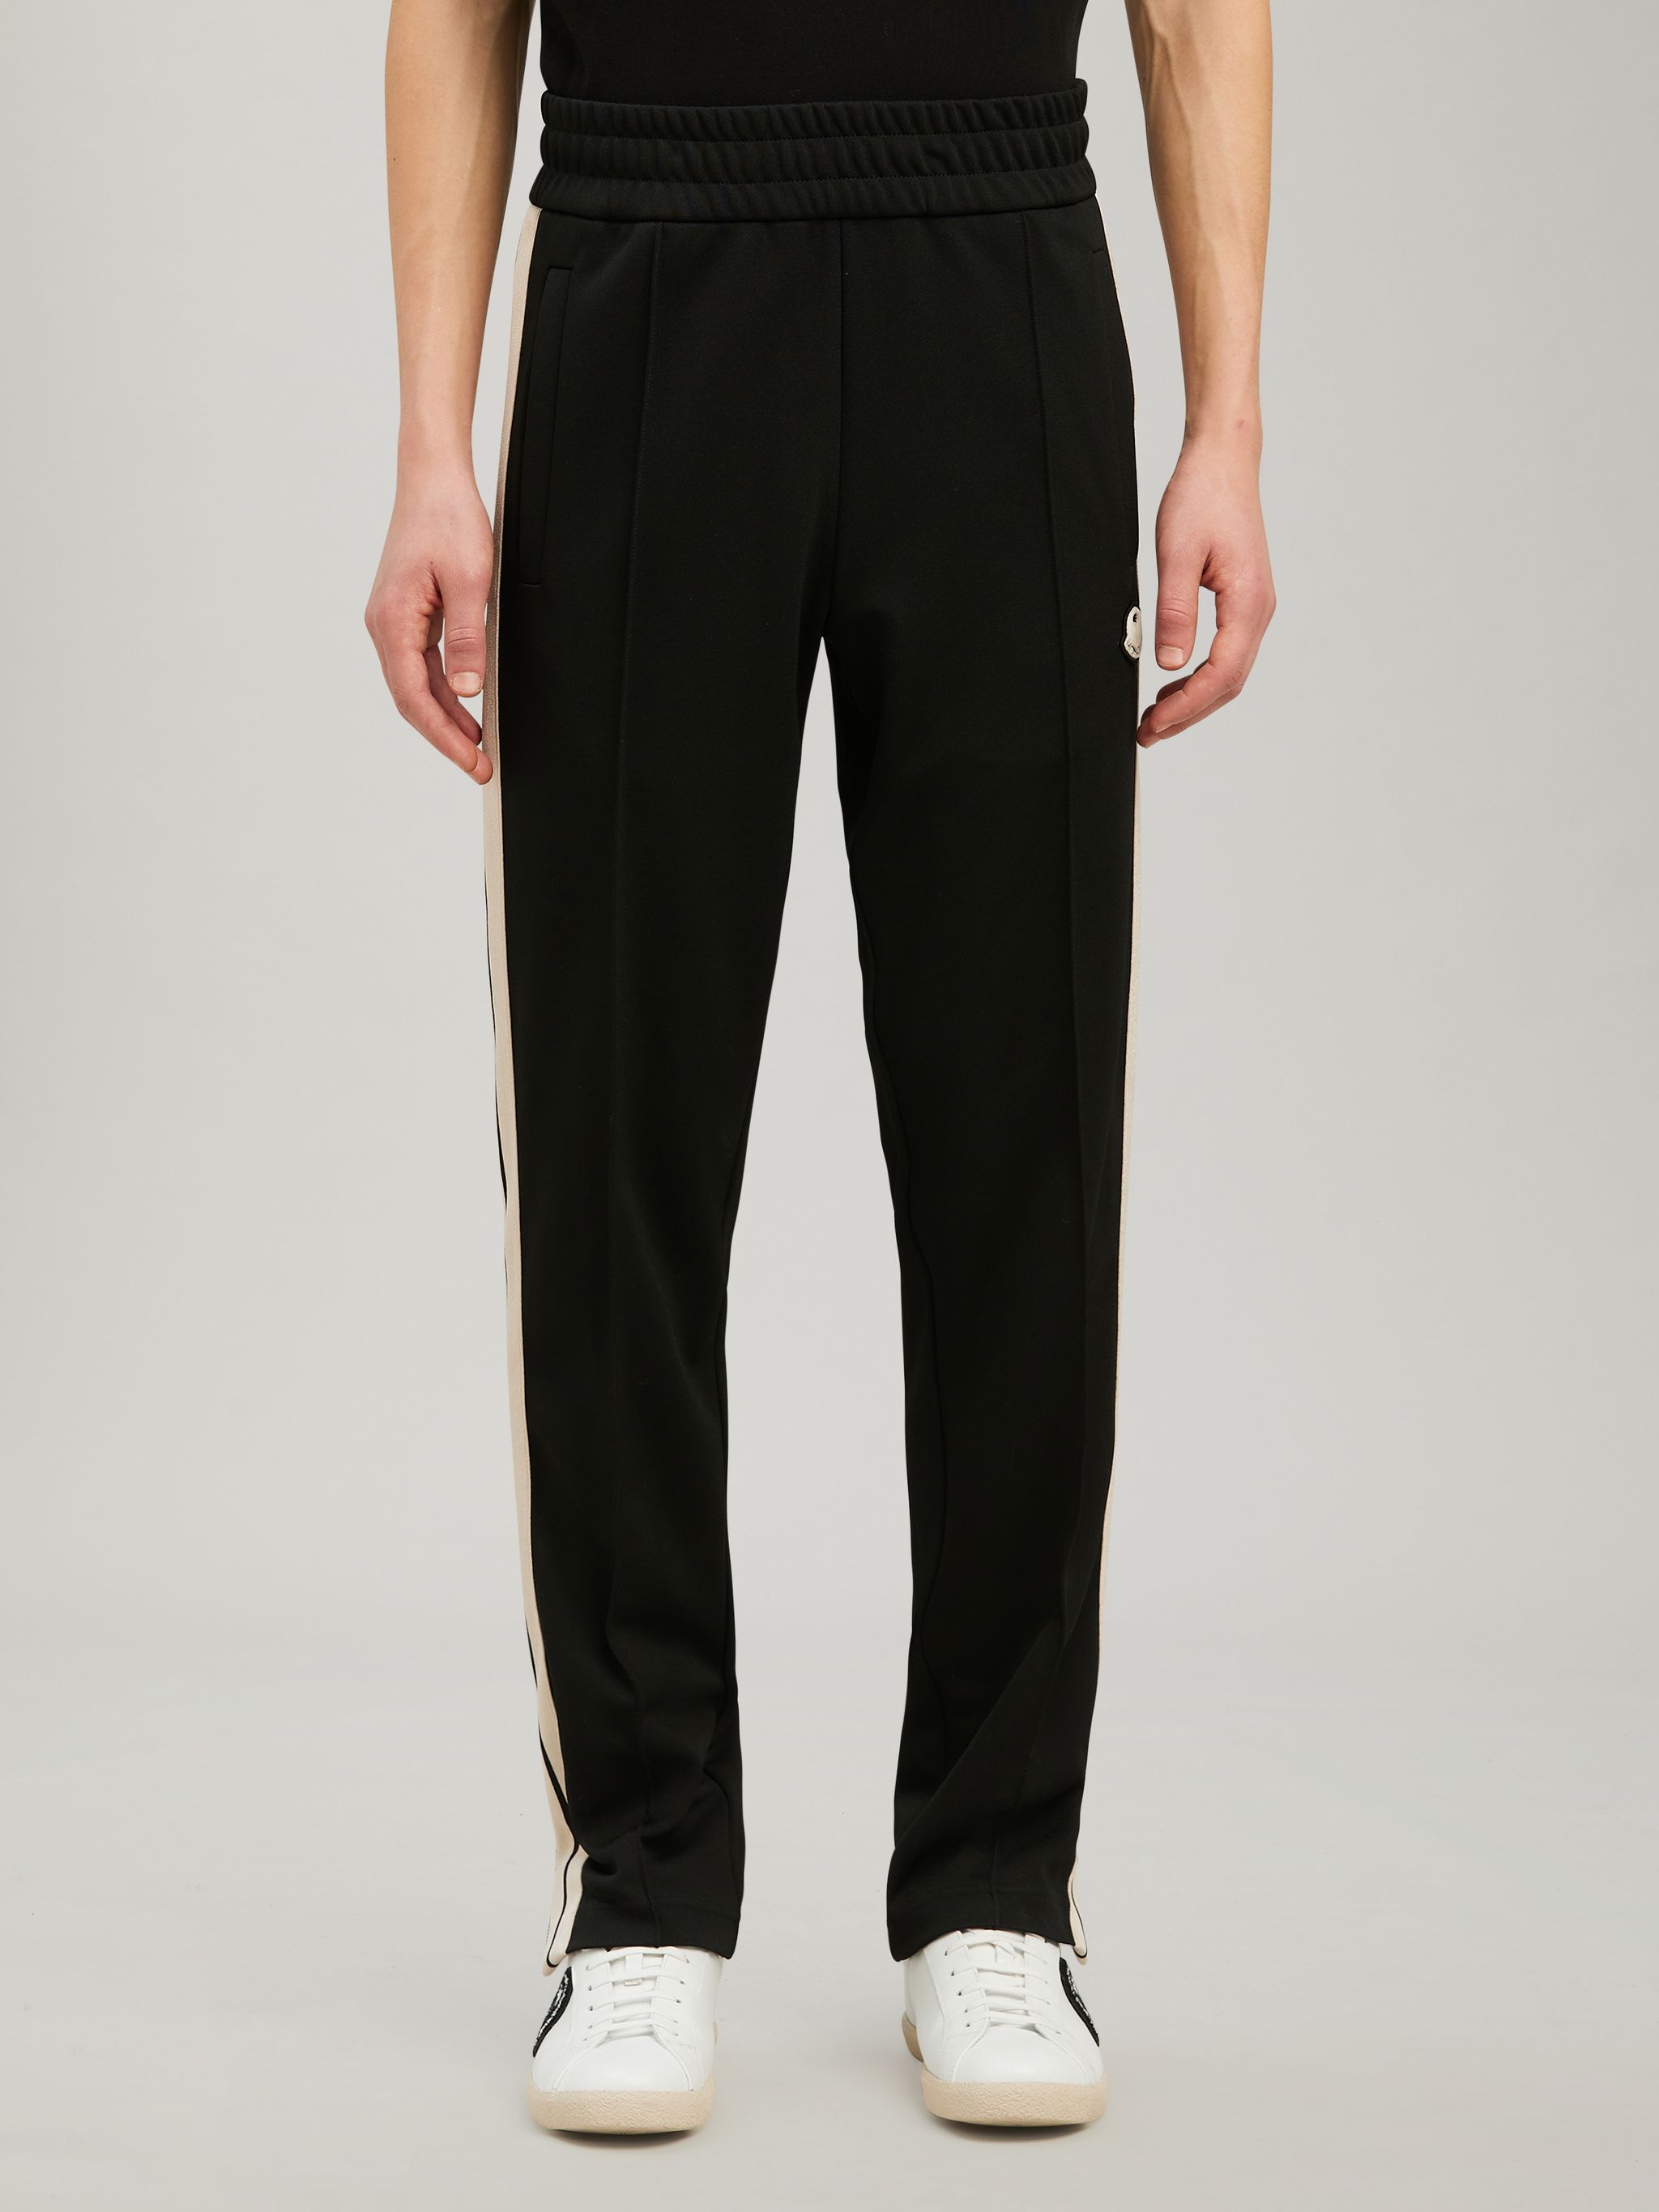 PAXMONCLER BLACK TRACK PANTS in black - Palm Angels® Official